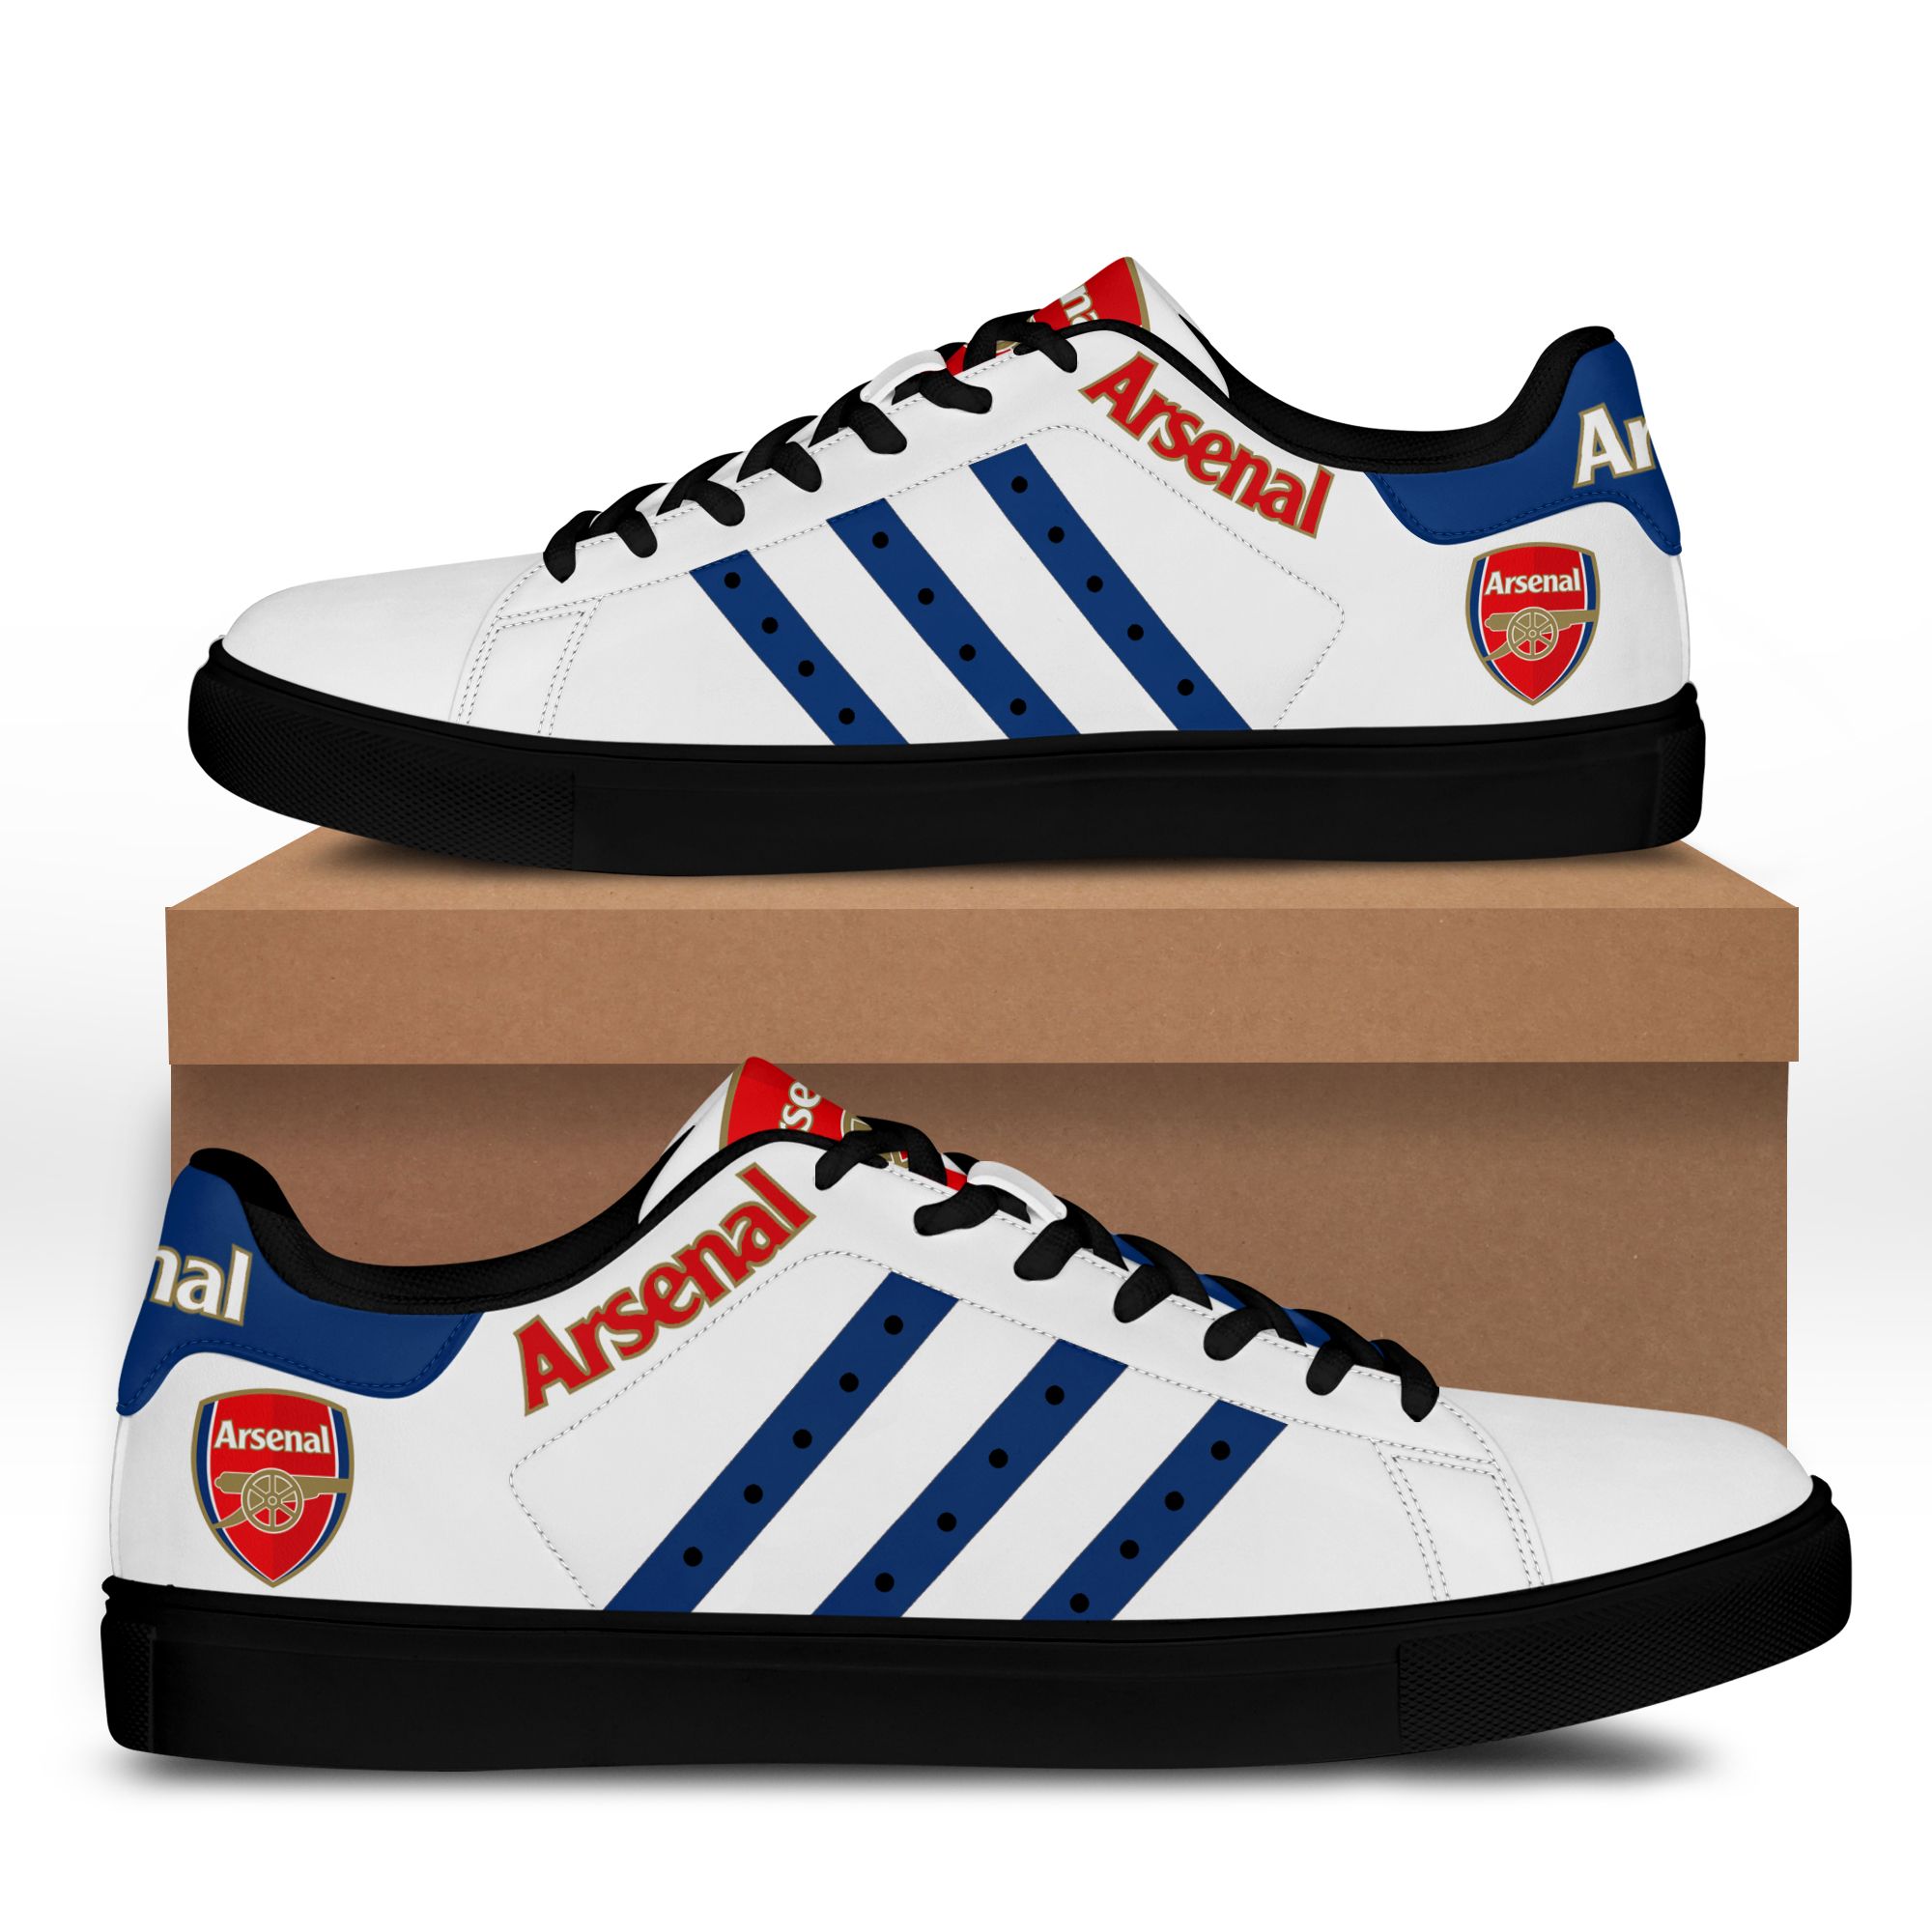 Arsenal stan smith low top shoes 2.3